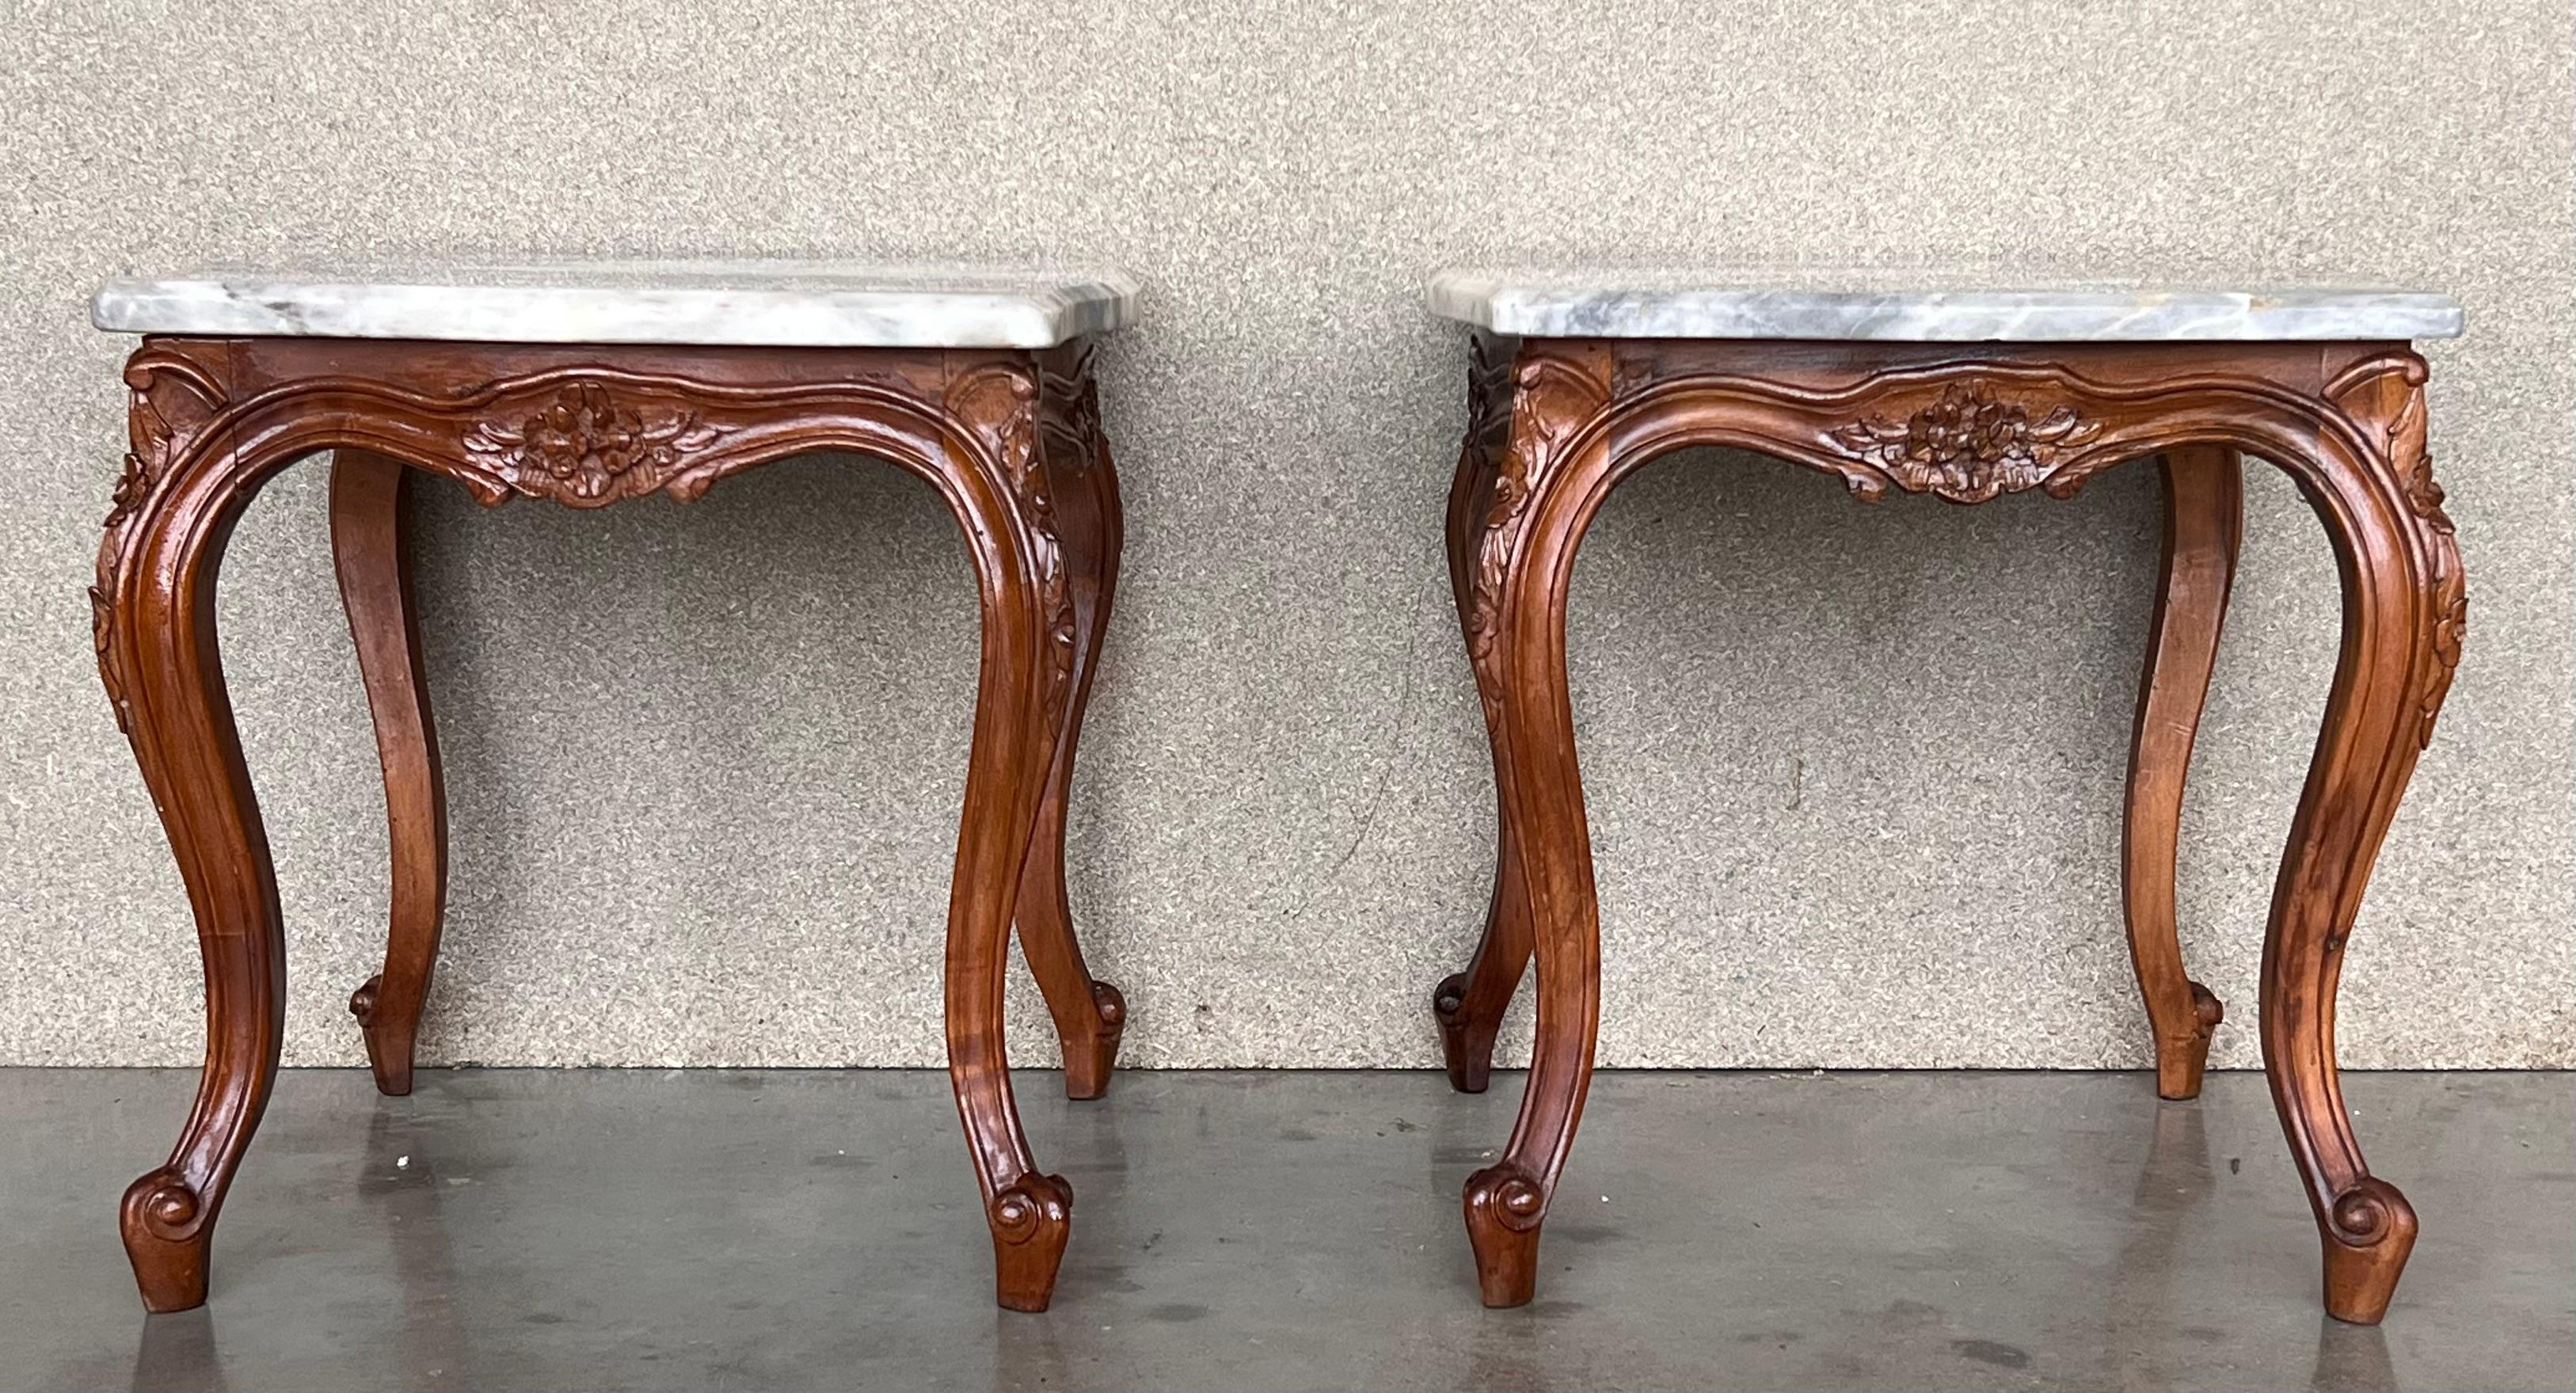 This elegant set of Louis XV style tables with marble top, structure made of walnut, with four tapered legs. 

